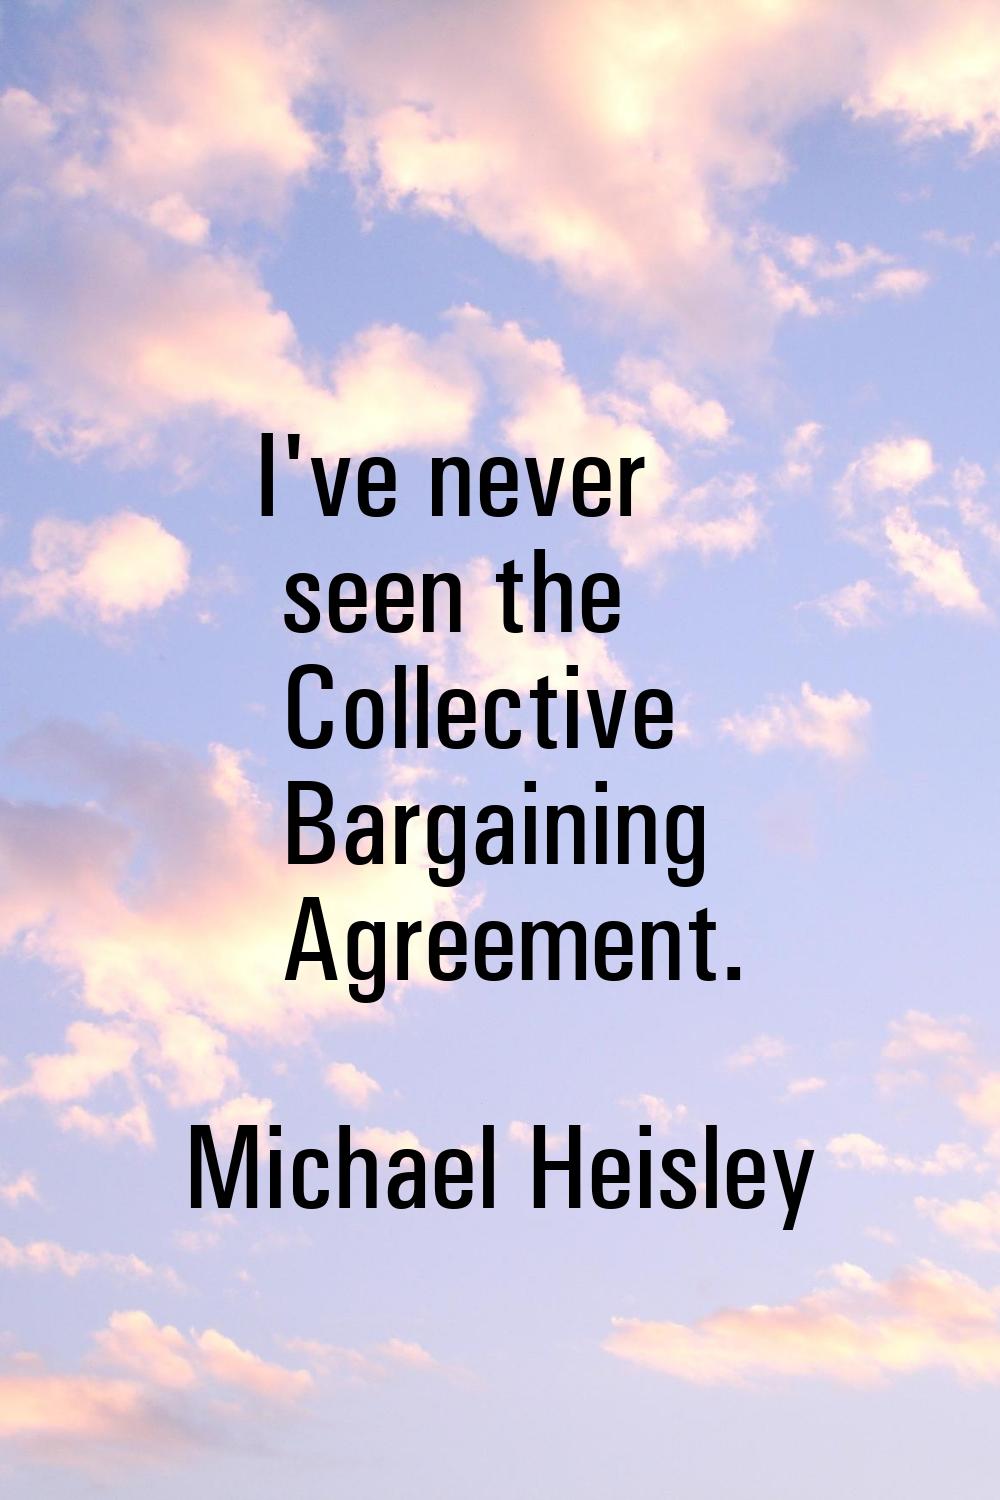 I've never seen the Collective Bargaining Agreement.